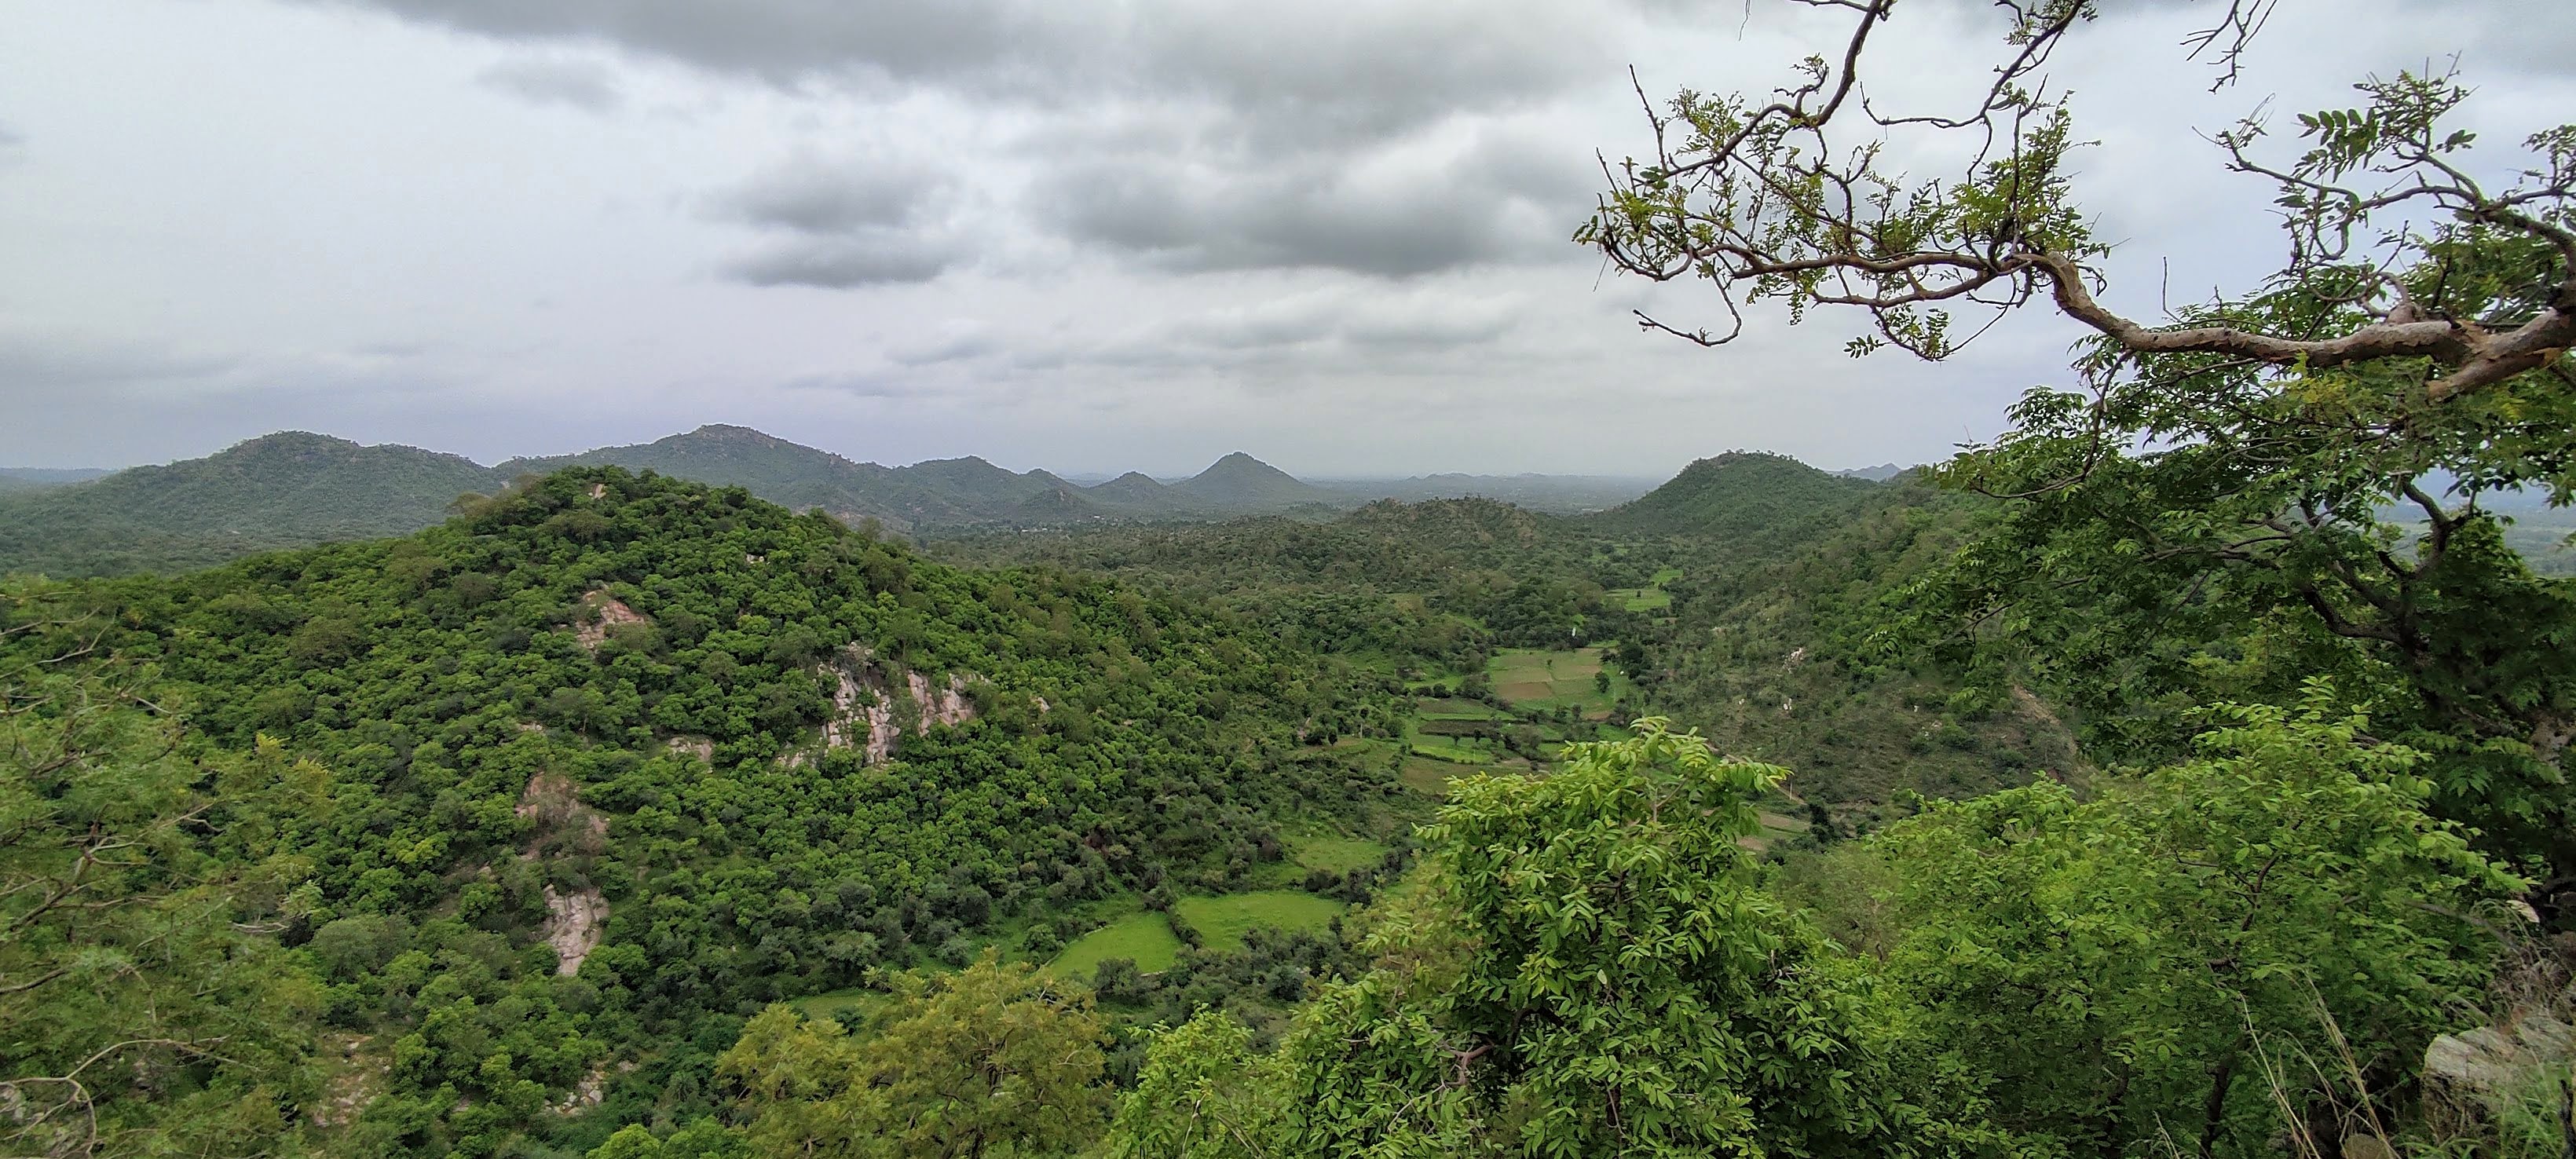 Lush green Aravali hills visible from the summit